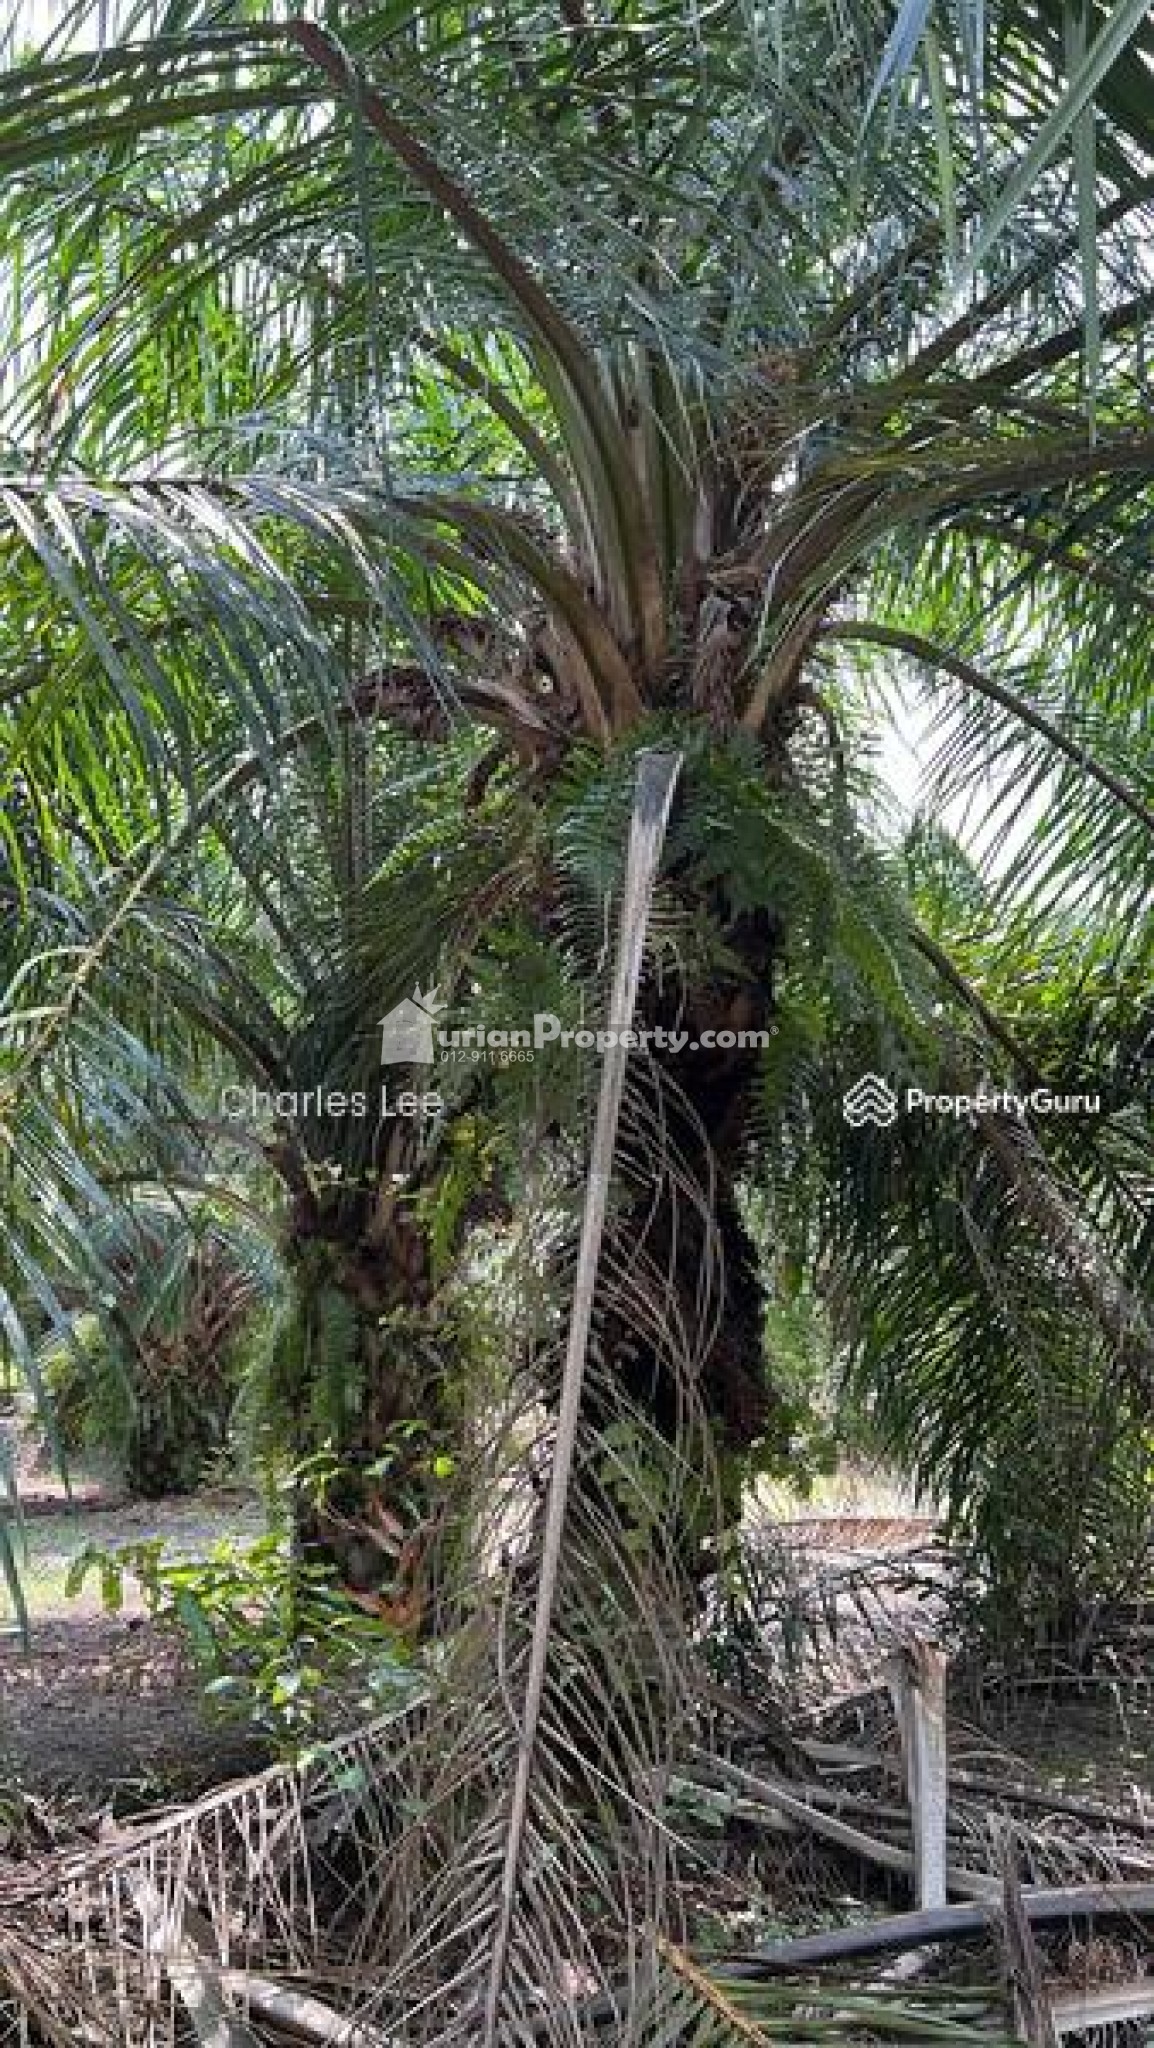 Agriculture Land For Sale at Kuala Selangor